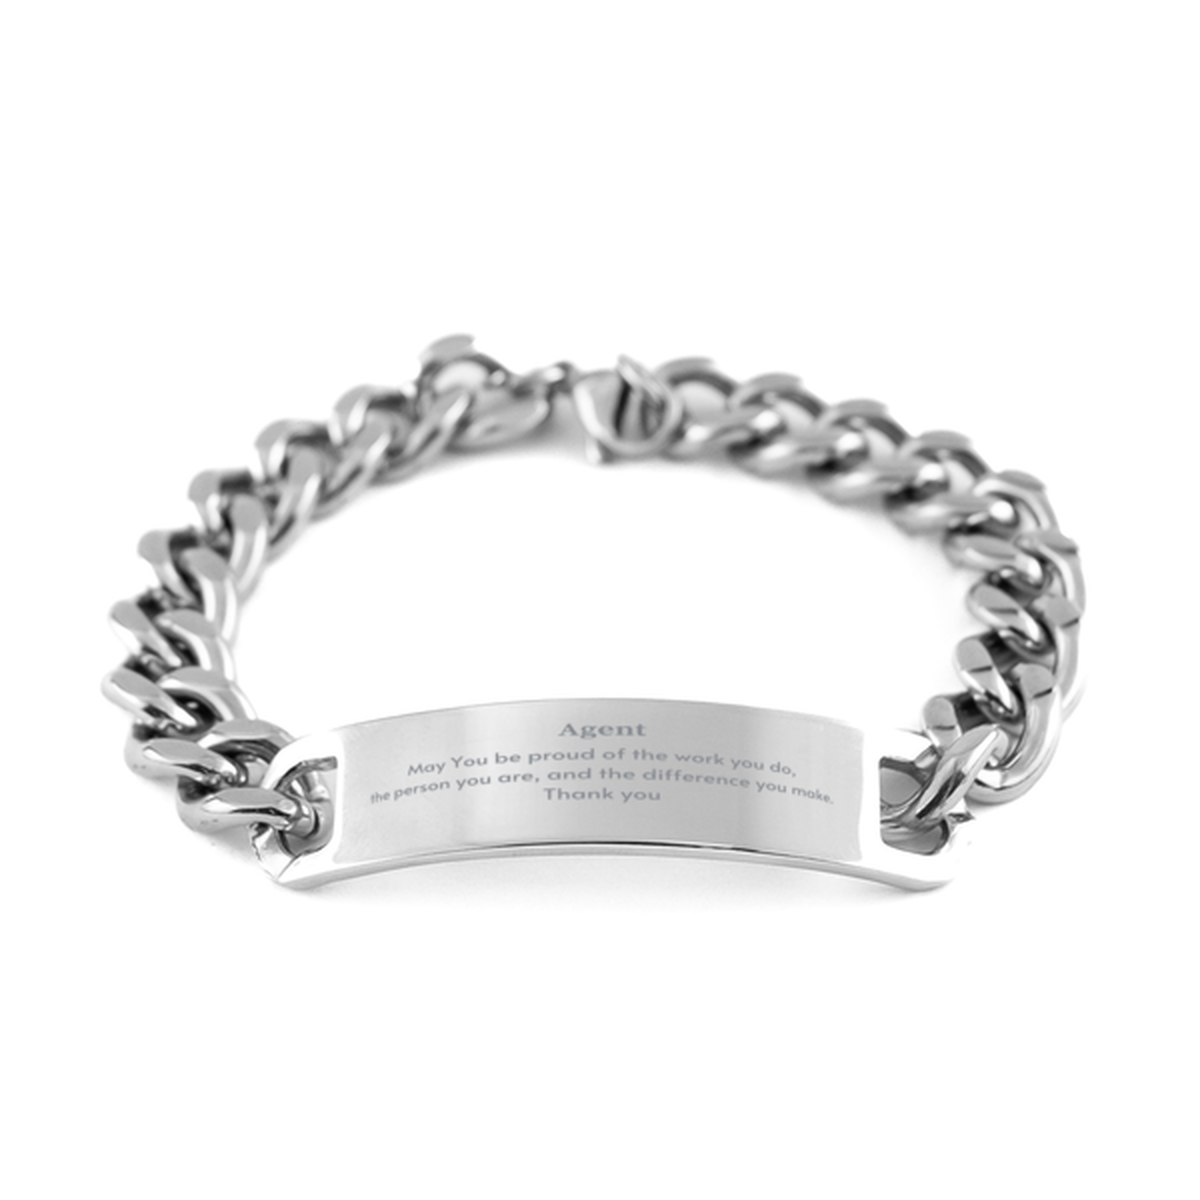 Heartwarming Cuban Chain Stainless Steel Bracelet Retirement Coworkers Gifts for Agent, Agent May You be proud of the work you do, the person you are Gifts for Boss Men Women Friends